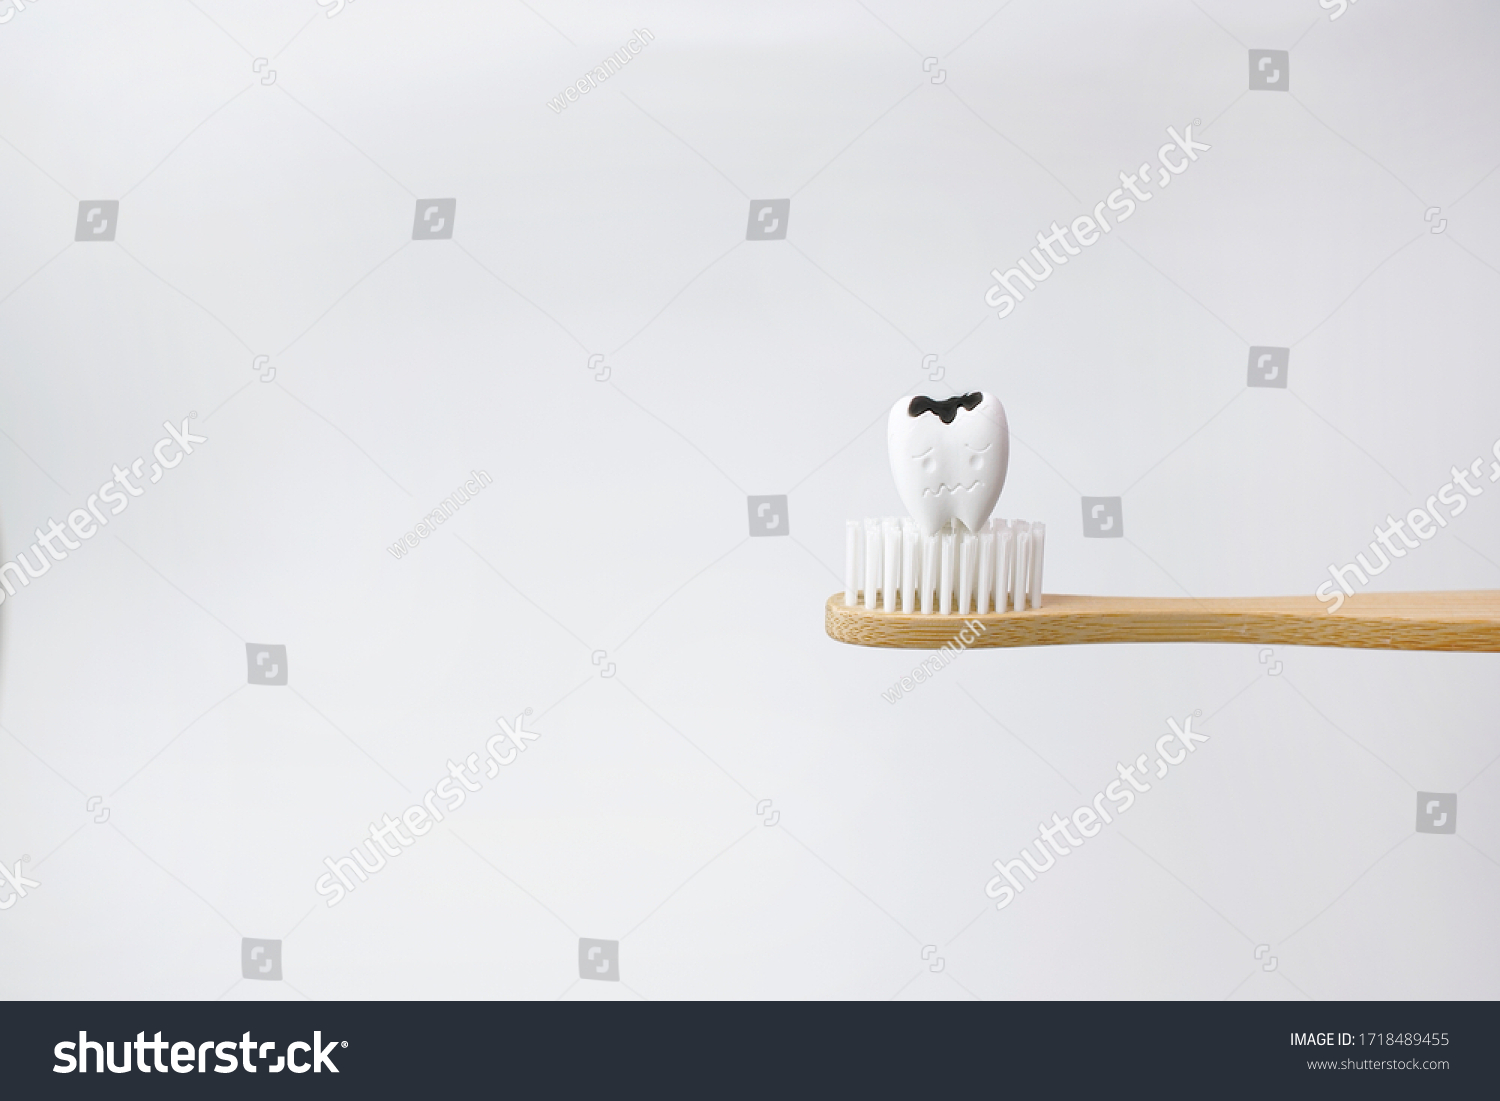 Cavity decayed tooth on wooden brown toothbrush on white background, How to prevent tooth decay and cavities #1718489455